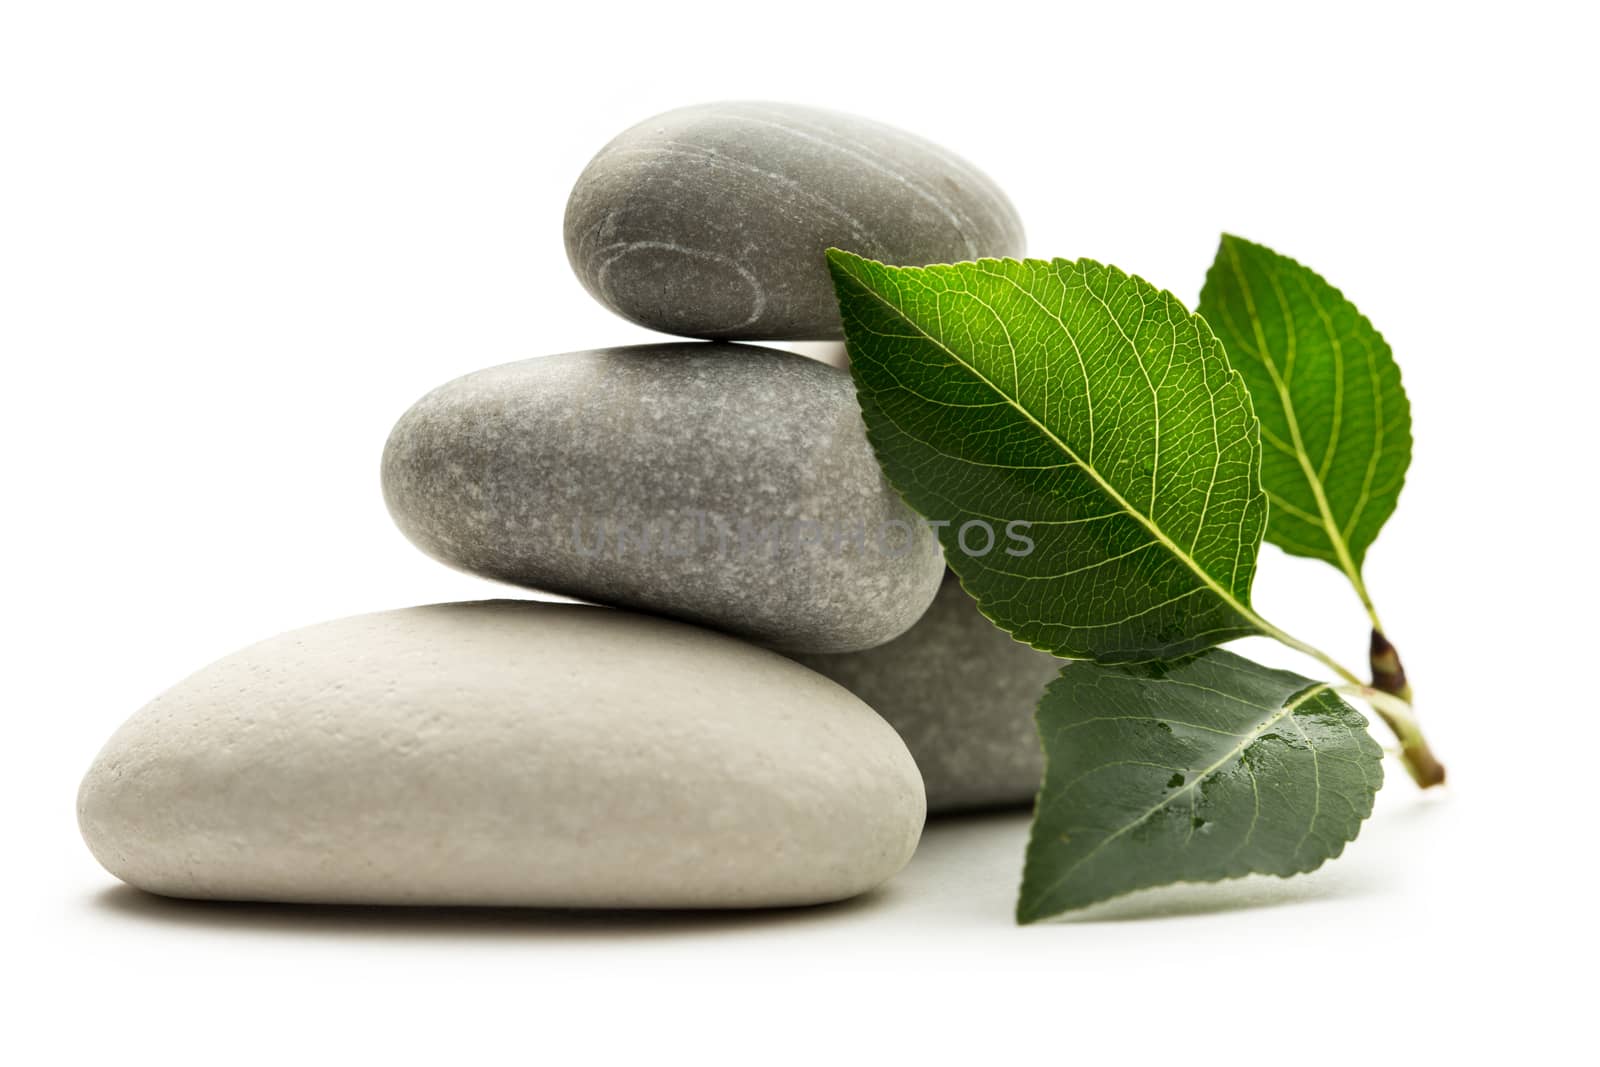 Stones with leaves on white background